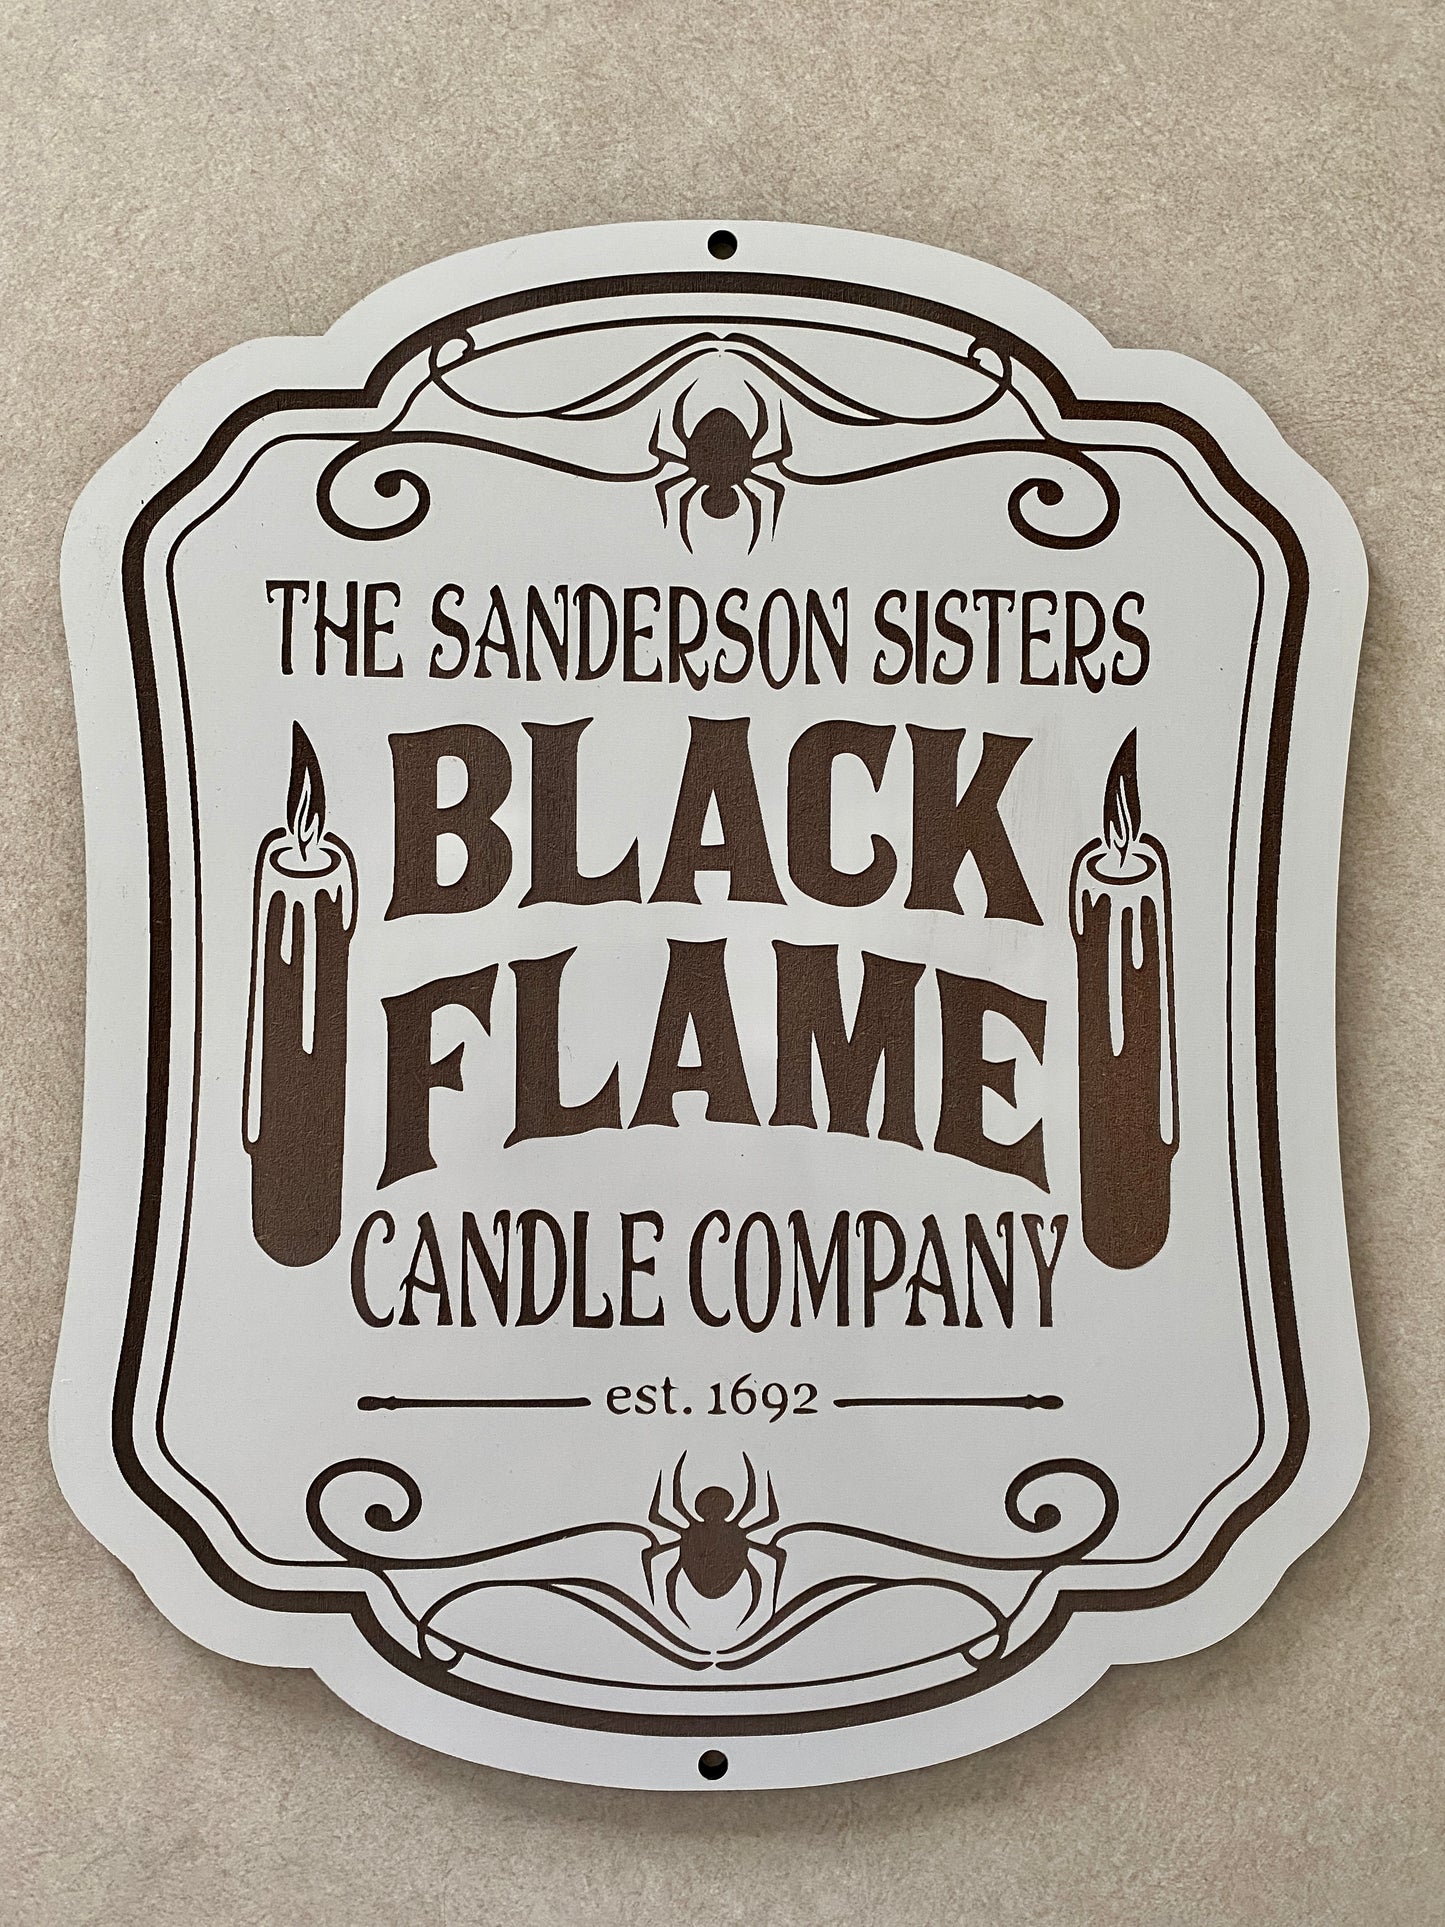 Sanderson Sisters Black Flame Candle Company Sign